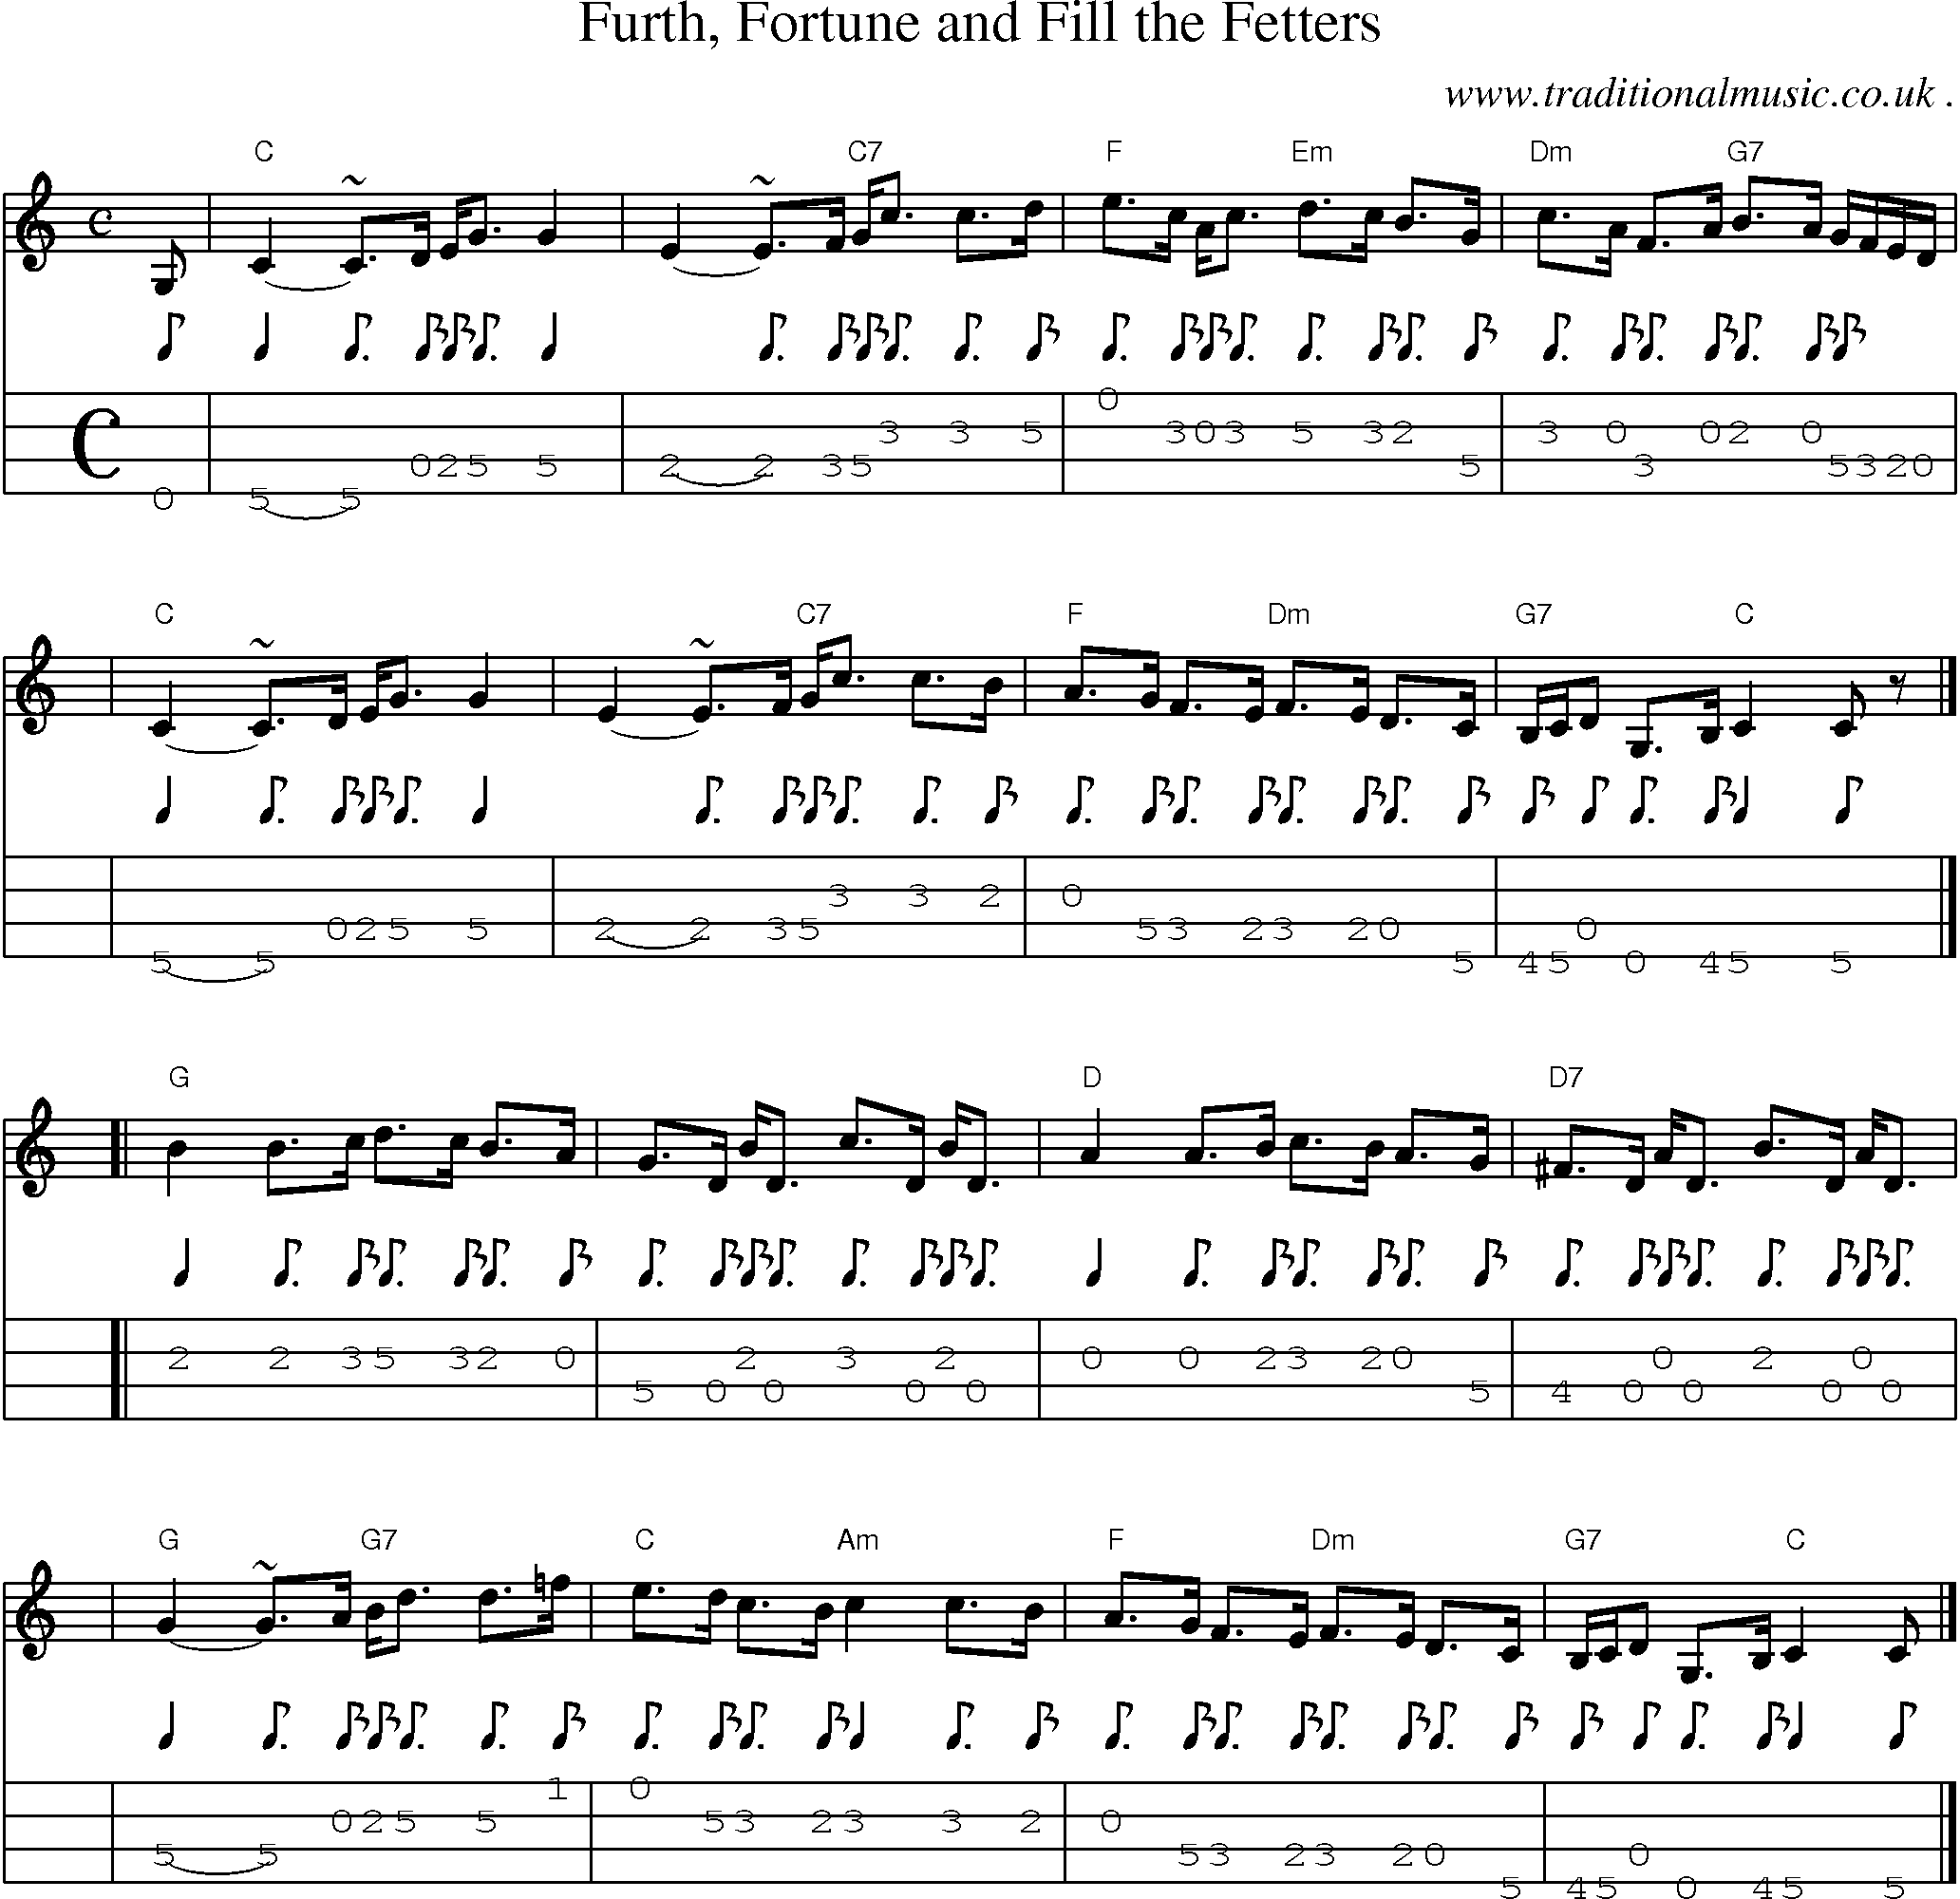 Sheet-music  score, Chords and Mandolin Tabs for Furth Fortune And Fill The Fetters